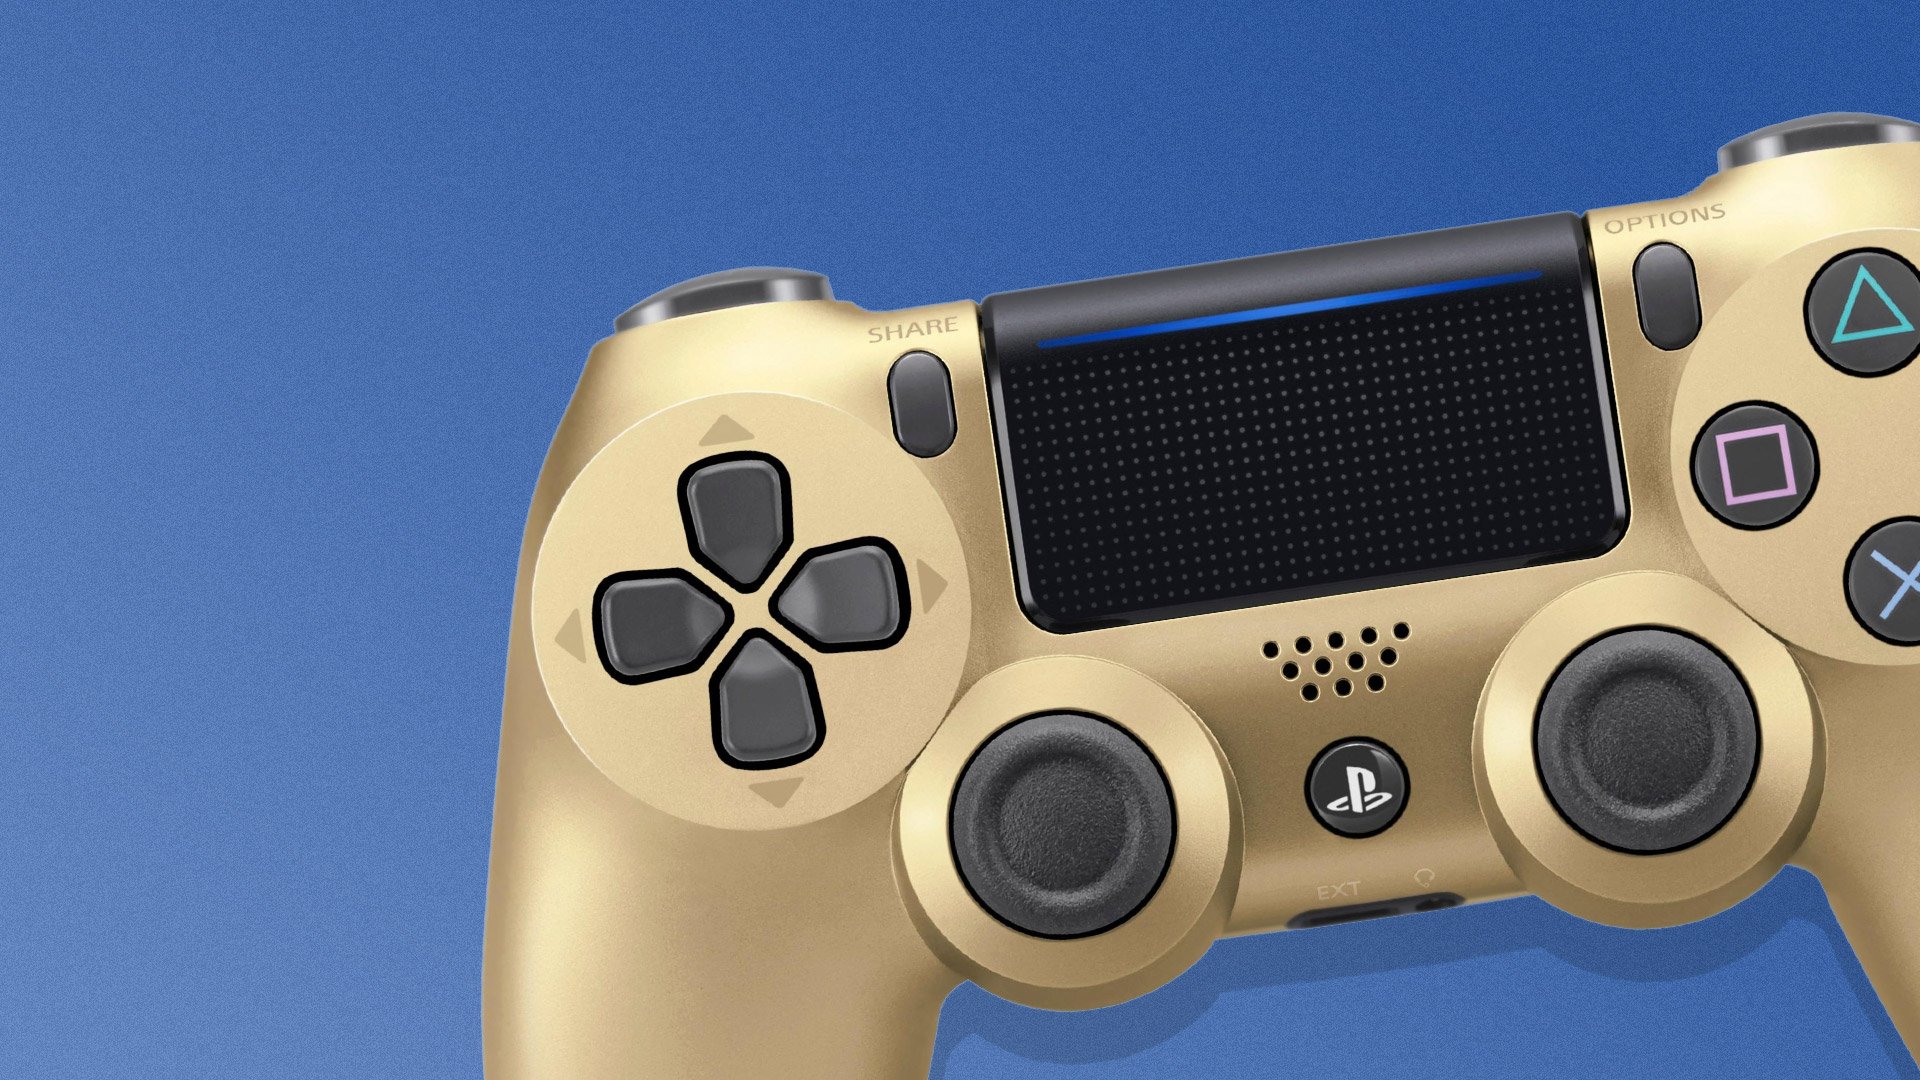 ps4 controller on black friday